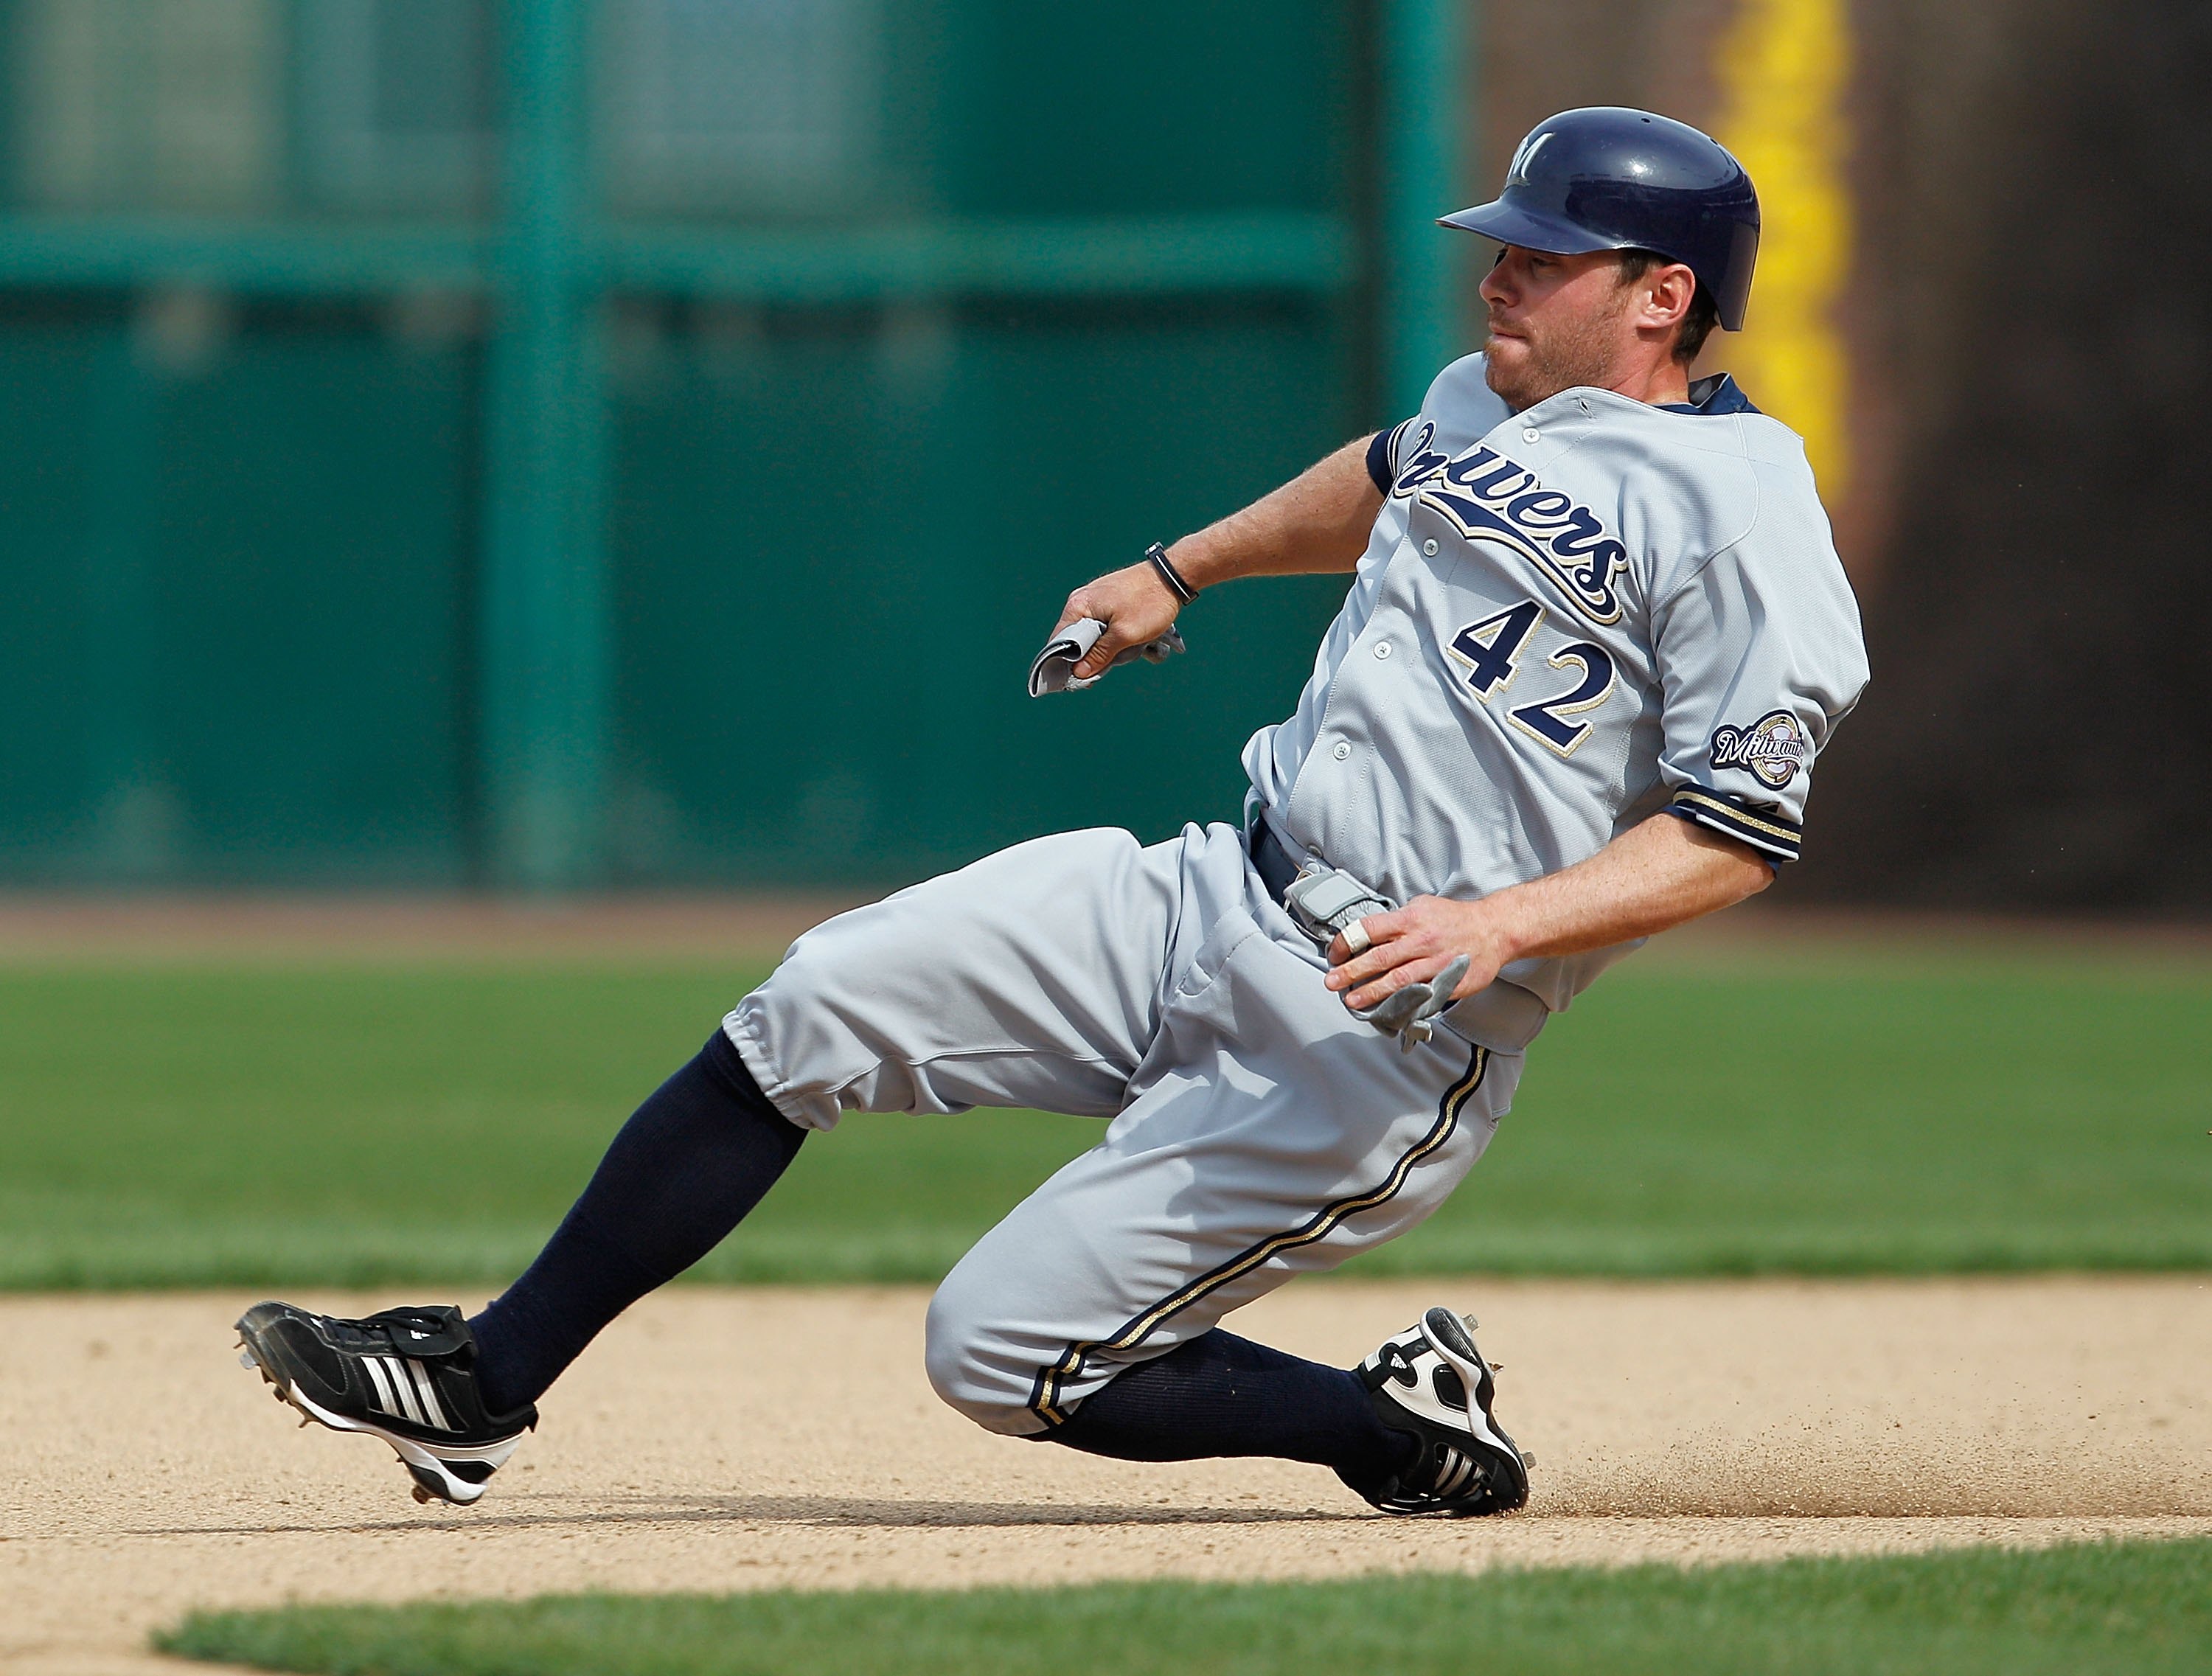 CHICAGO - APRIL 15: Joe Inglett of the Milwaukee Brewers, wearing a number 42 jersey in honor of Jackie Robinson, slides into second base against the Chicago Cubs at Wrigley Field on April 15, 2010 in Chicago, Illinois. The Brewers defeated the Cubs 8-6. 